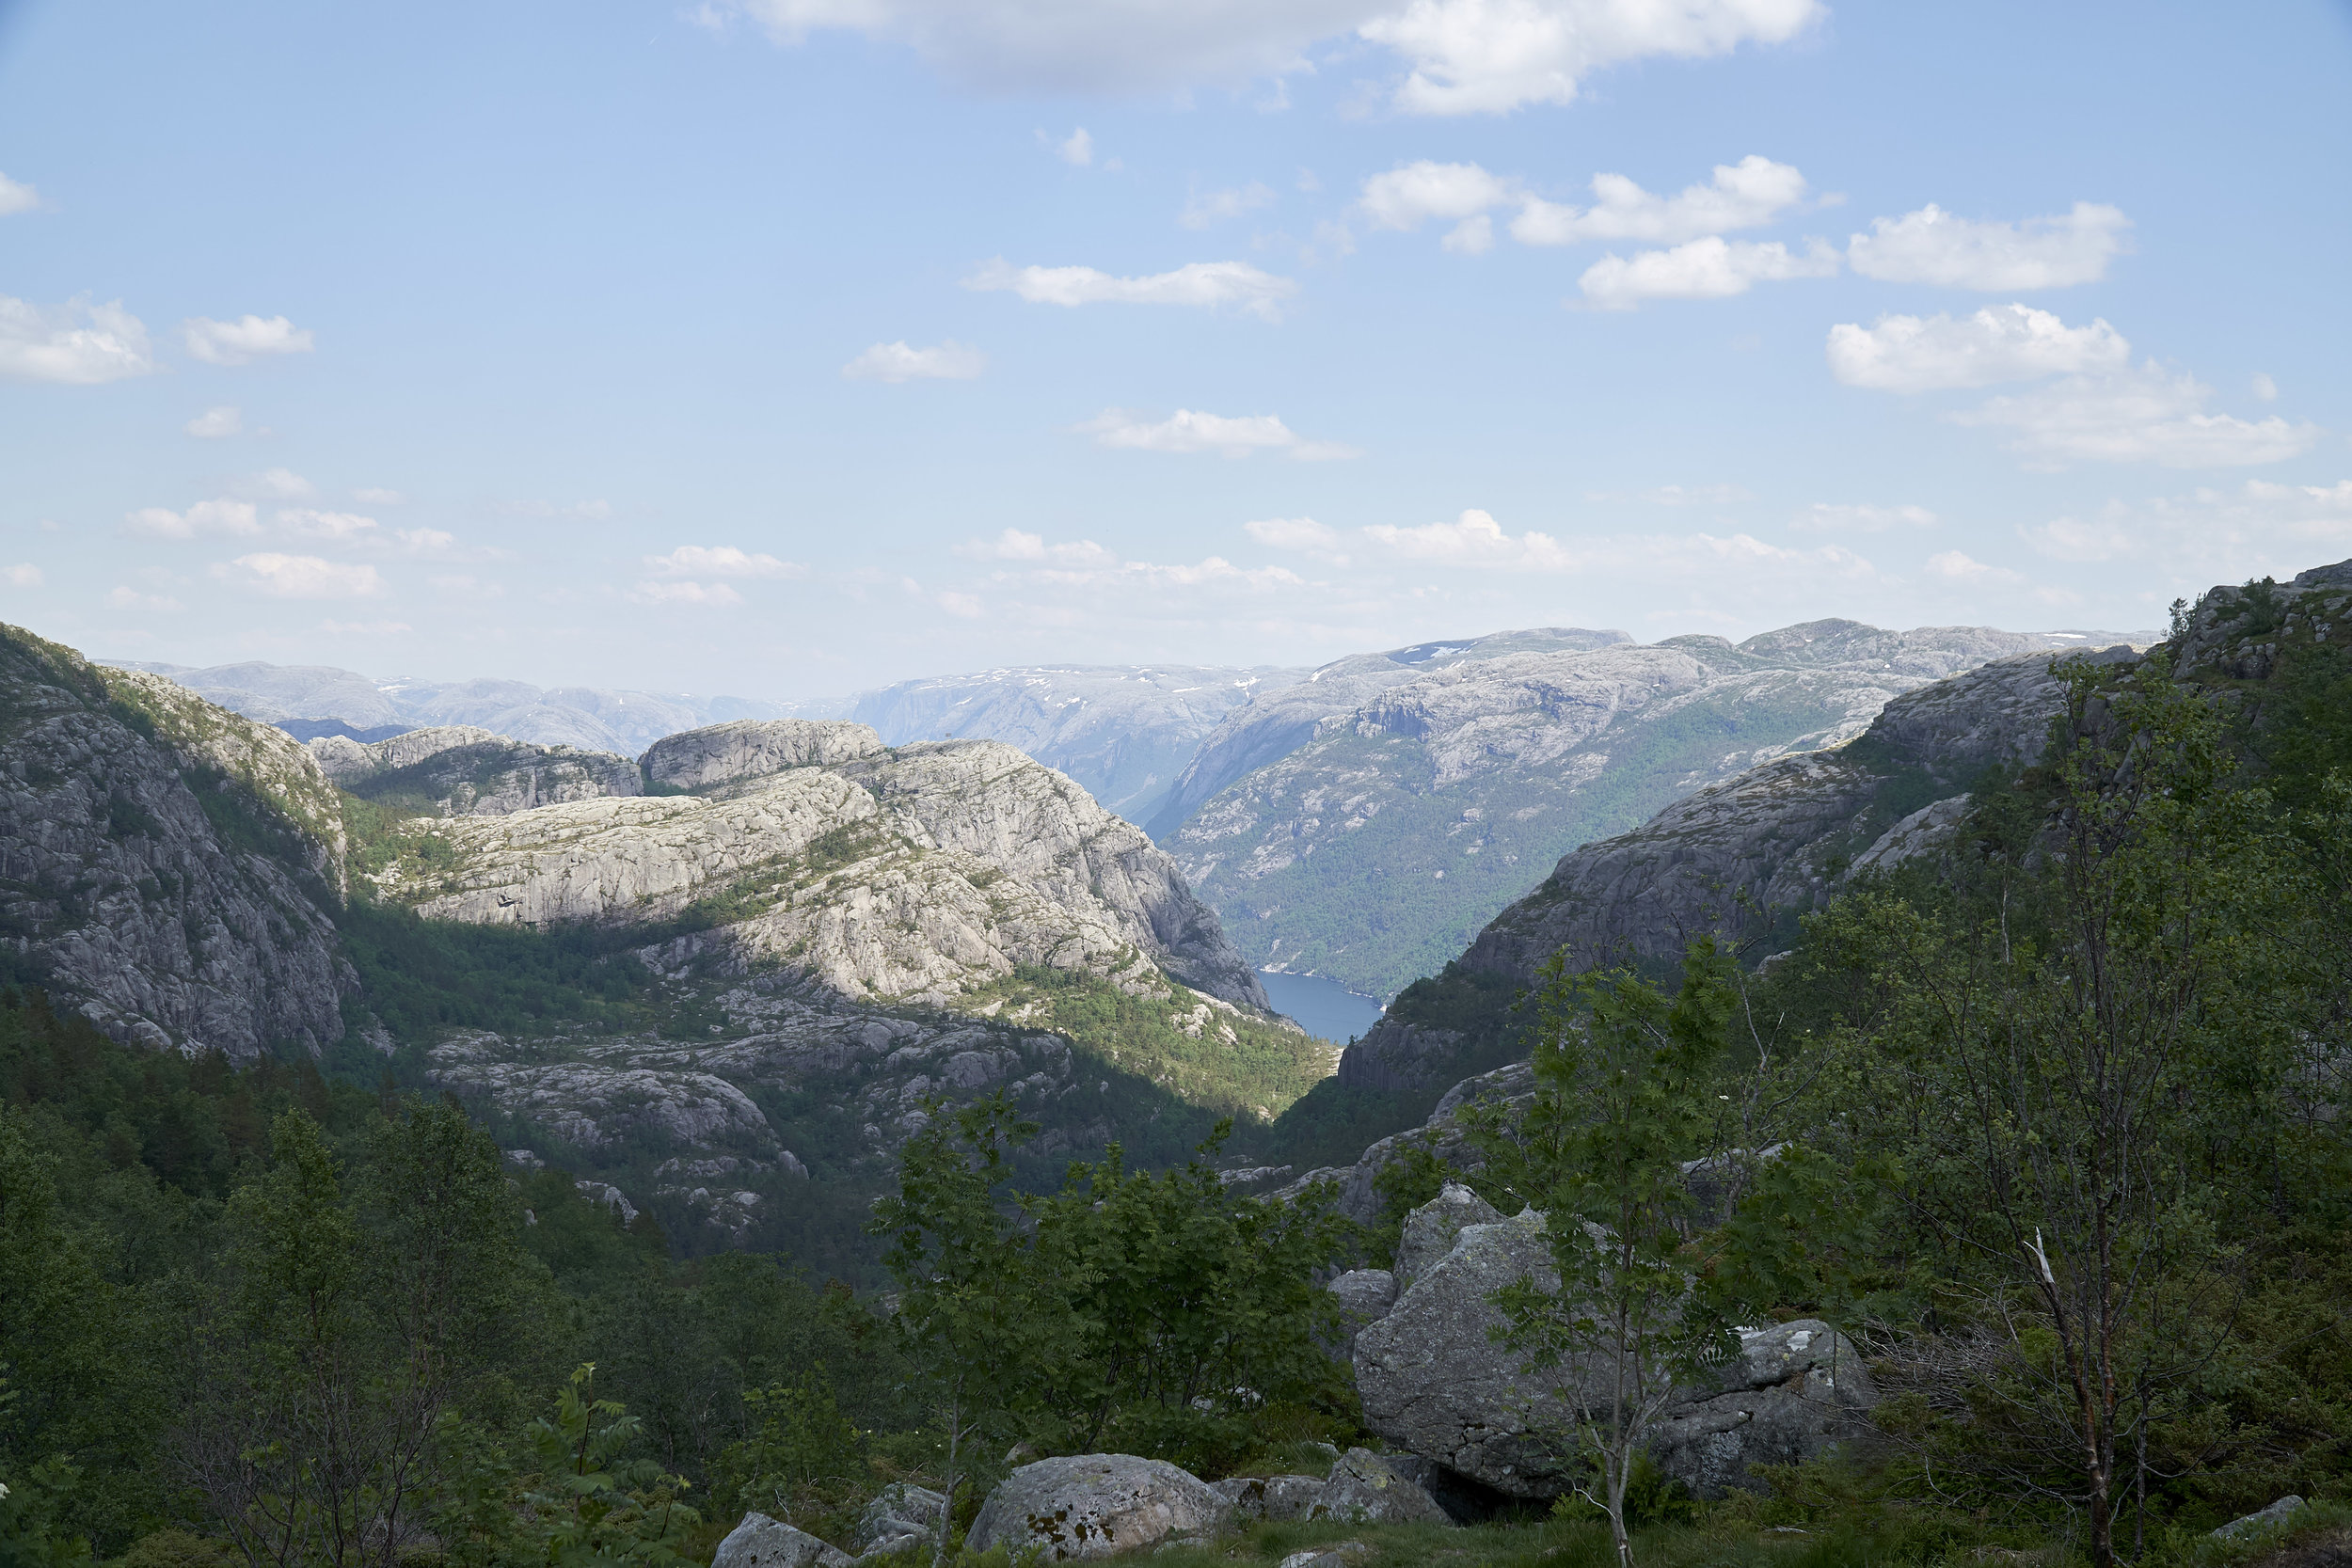  View of the fjord just before the final ascent to Pulpit Rock.  